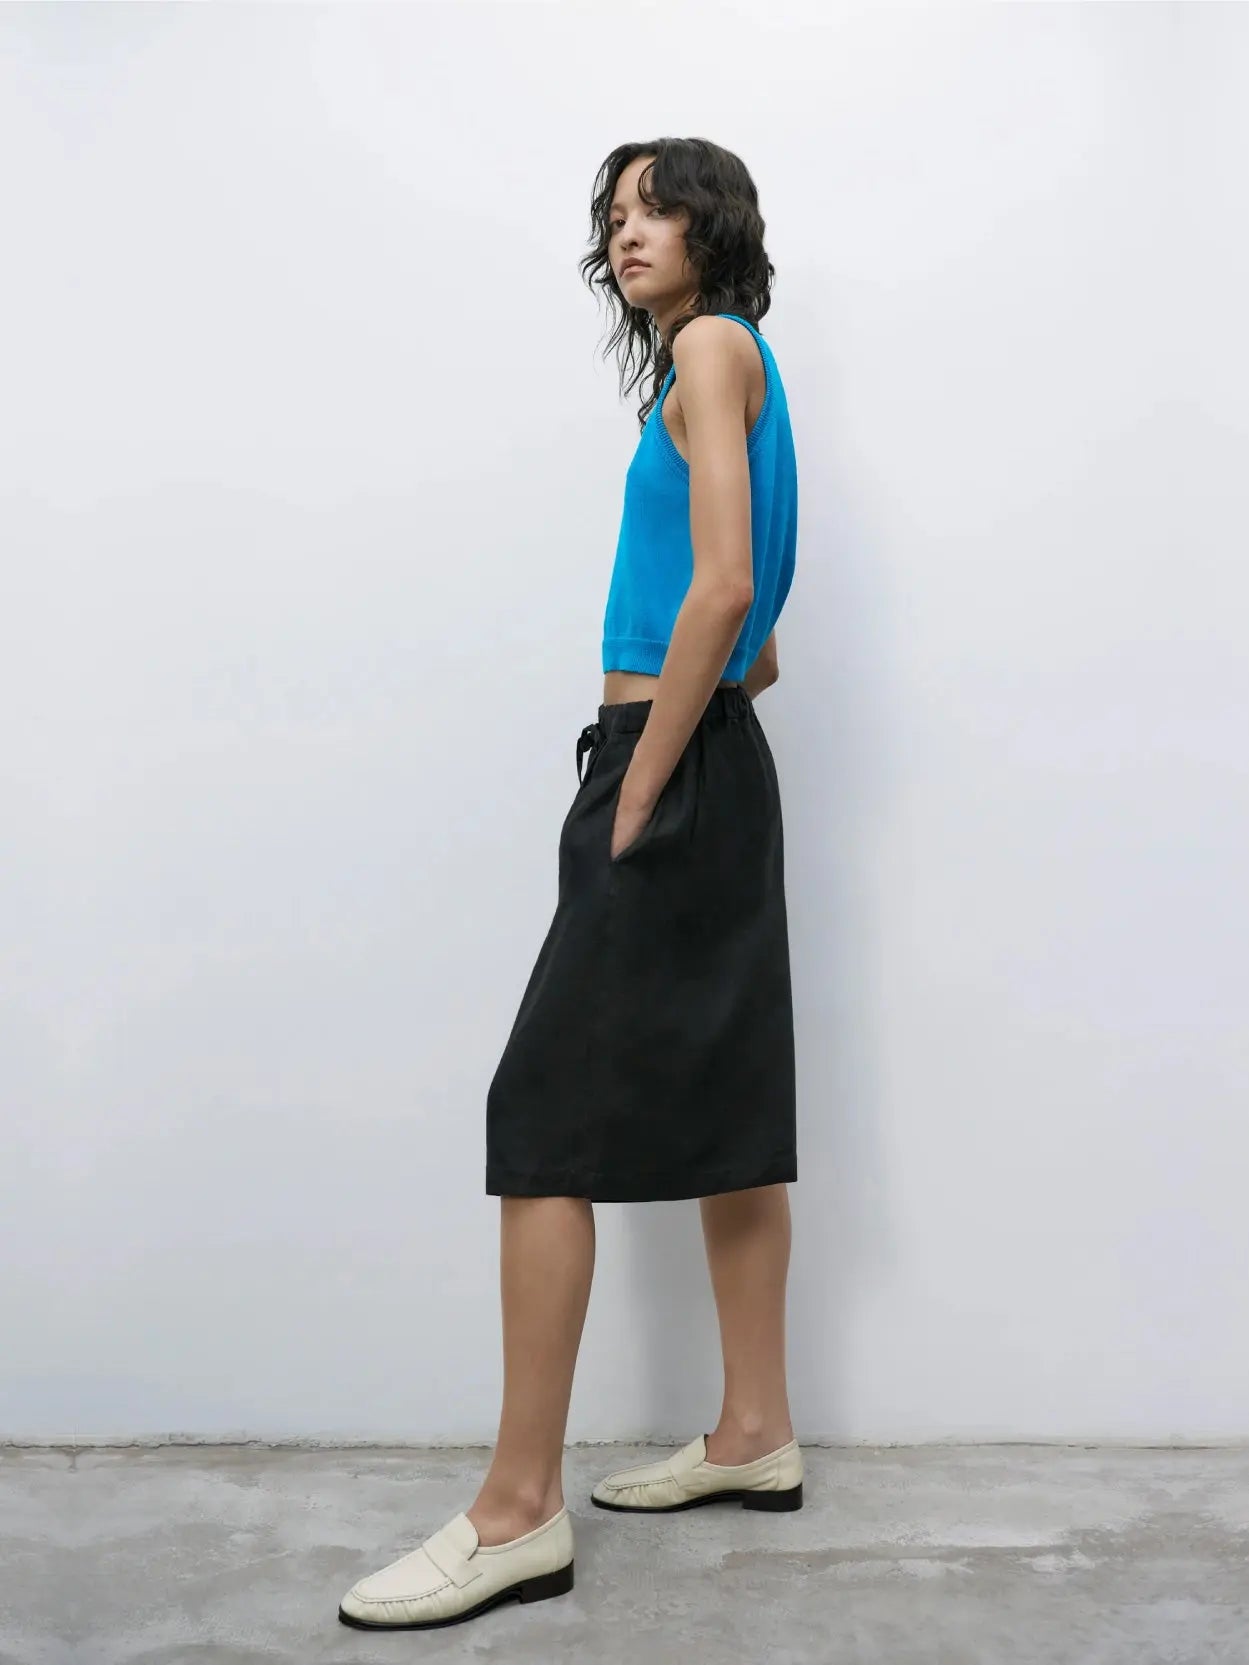 A pair of black, knee-length shorts with an elastic waistband and drawstring, laid flat on a white background. The fabric appears to be lightweight and comfortable, suitable for casual or athletic wear—perfect for browsing through the vibrant streets of Barcelona or grabbing gear from bassalstore. The Linen Maxi Bermuda Black by Cordera would be an excellent choice.